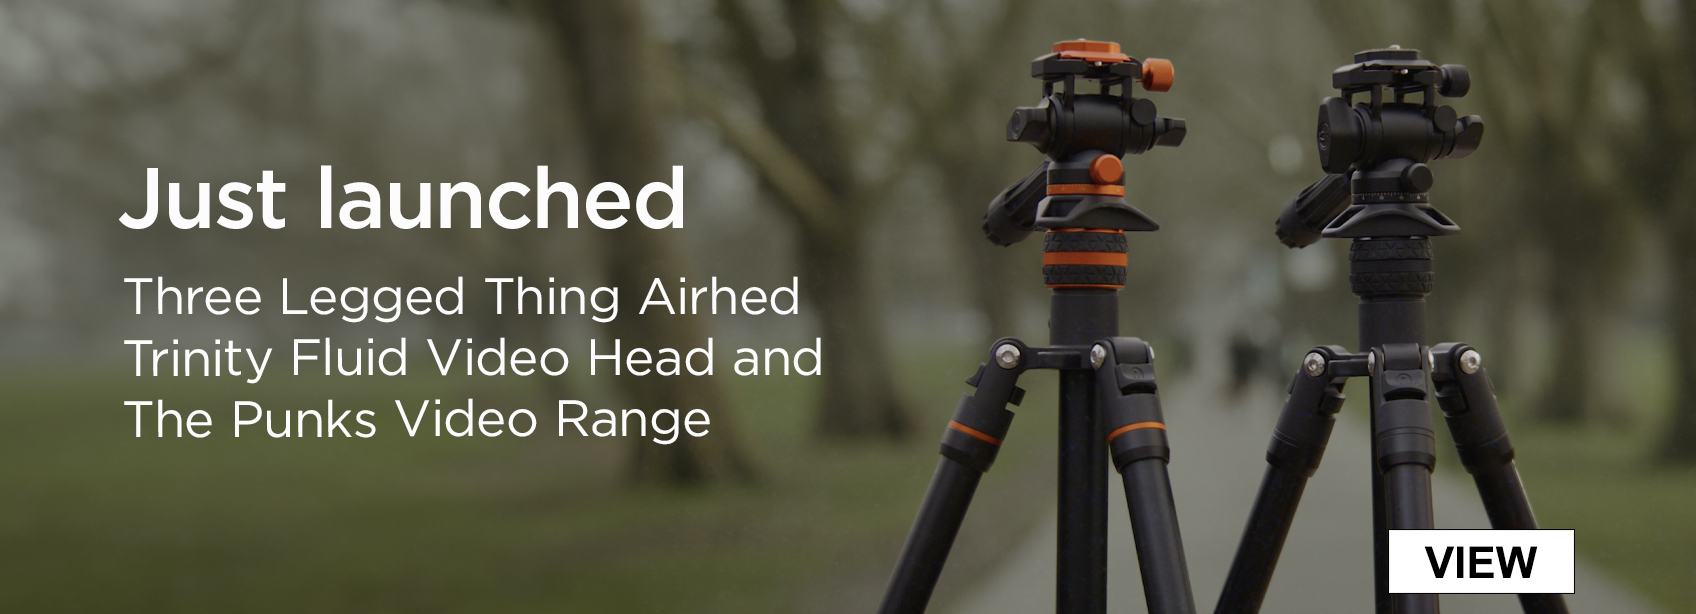 Just Launched- Three Legged Thing Airhed Trinity Fluid Video Head and The Punks Video Range